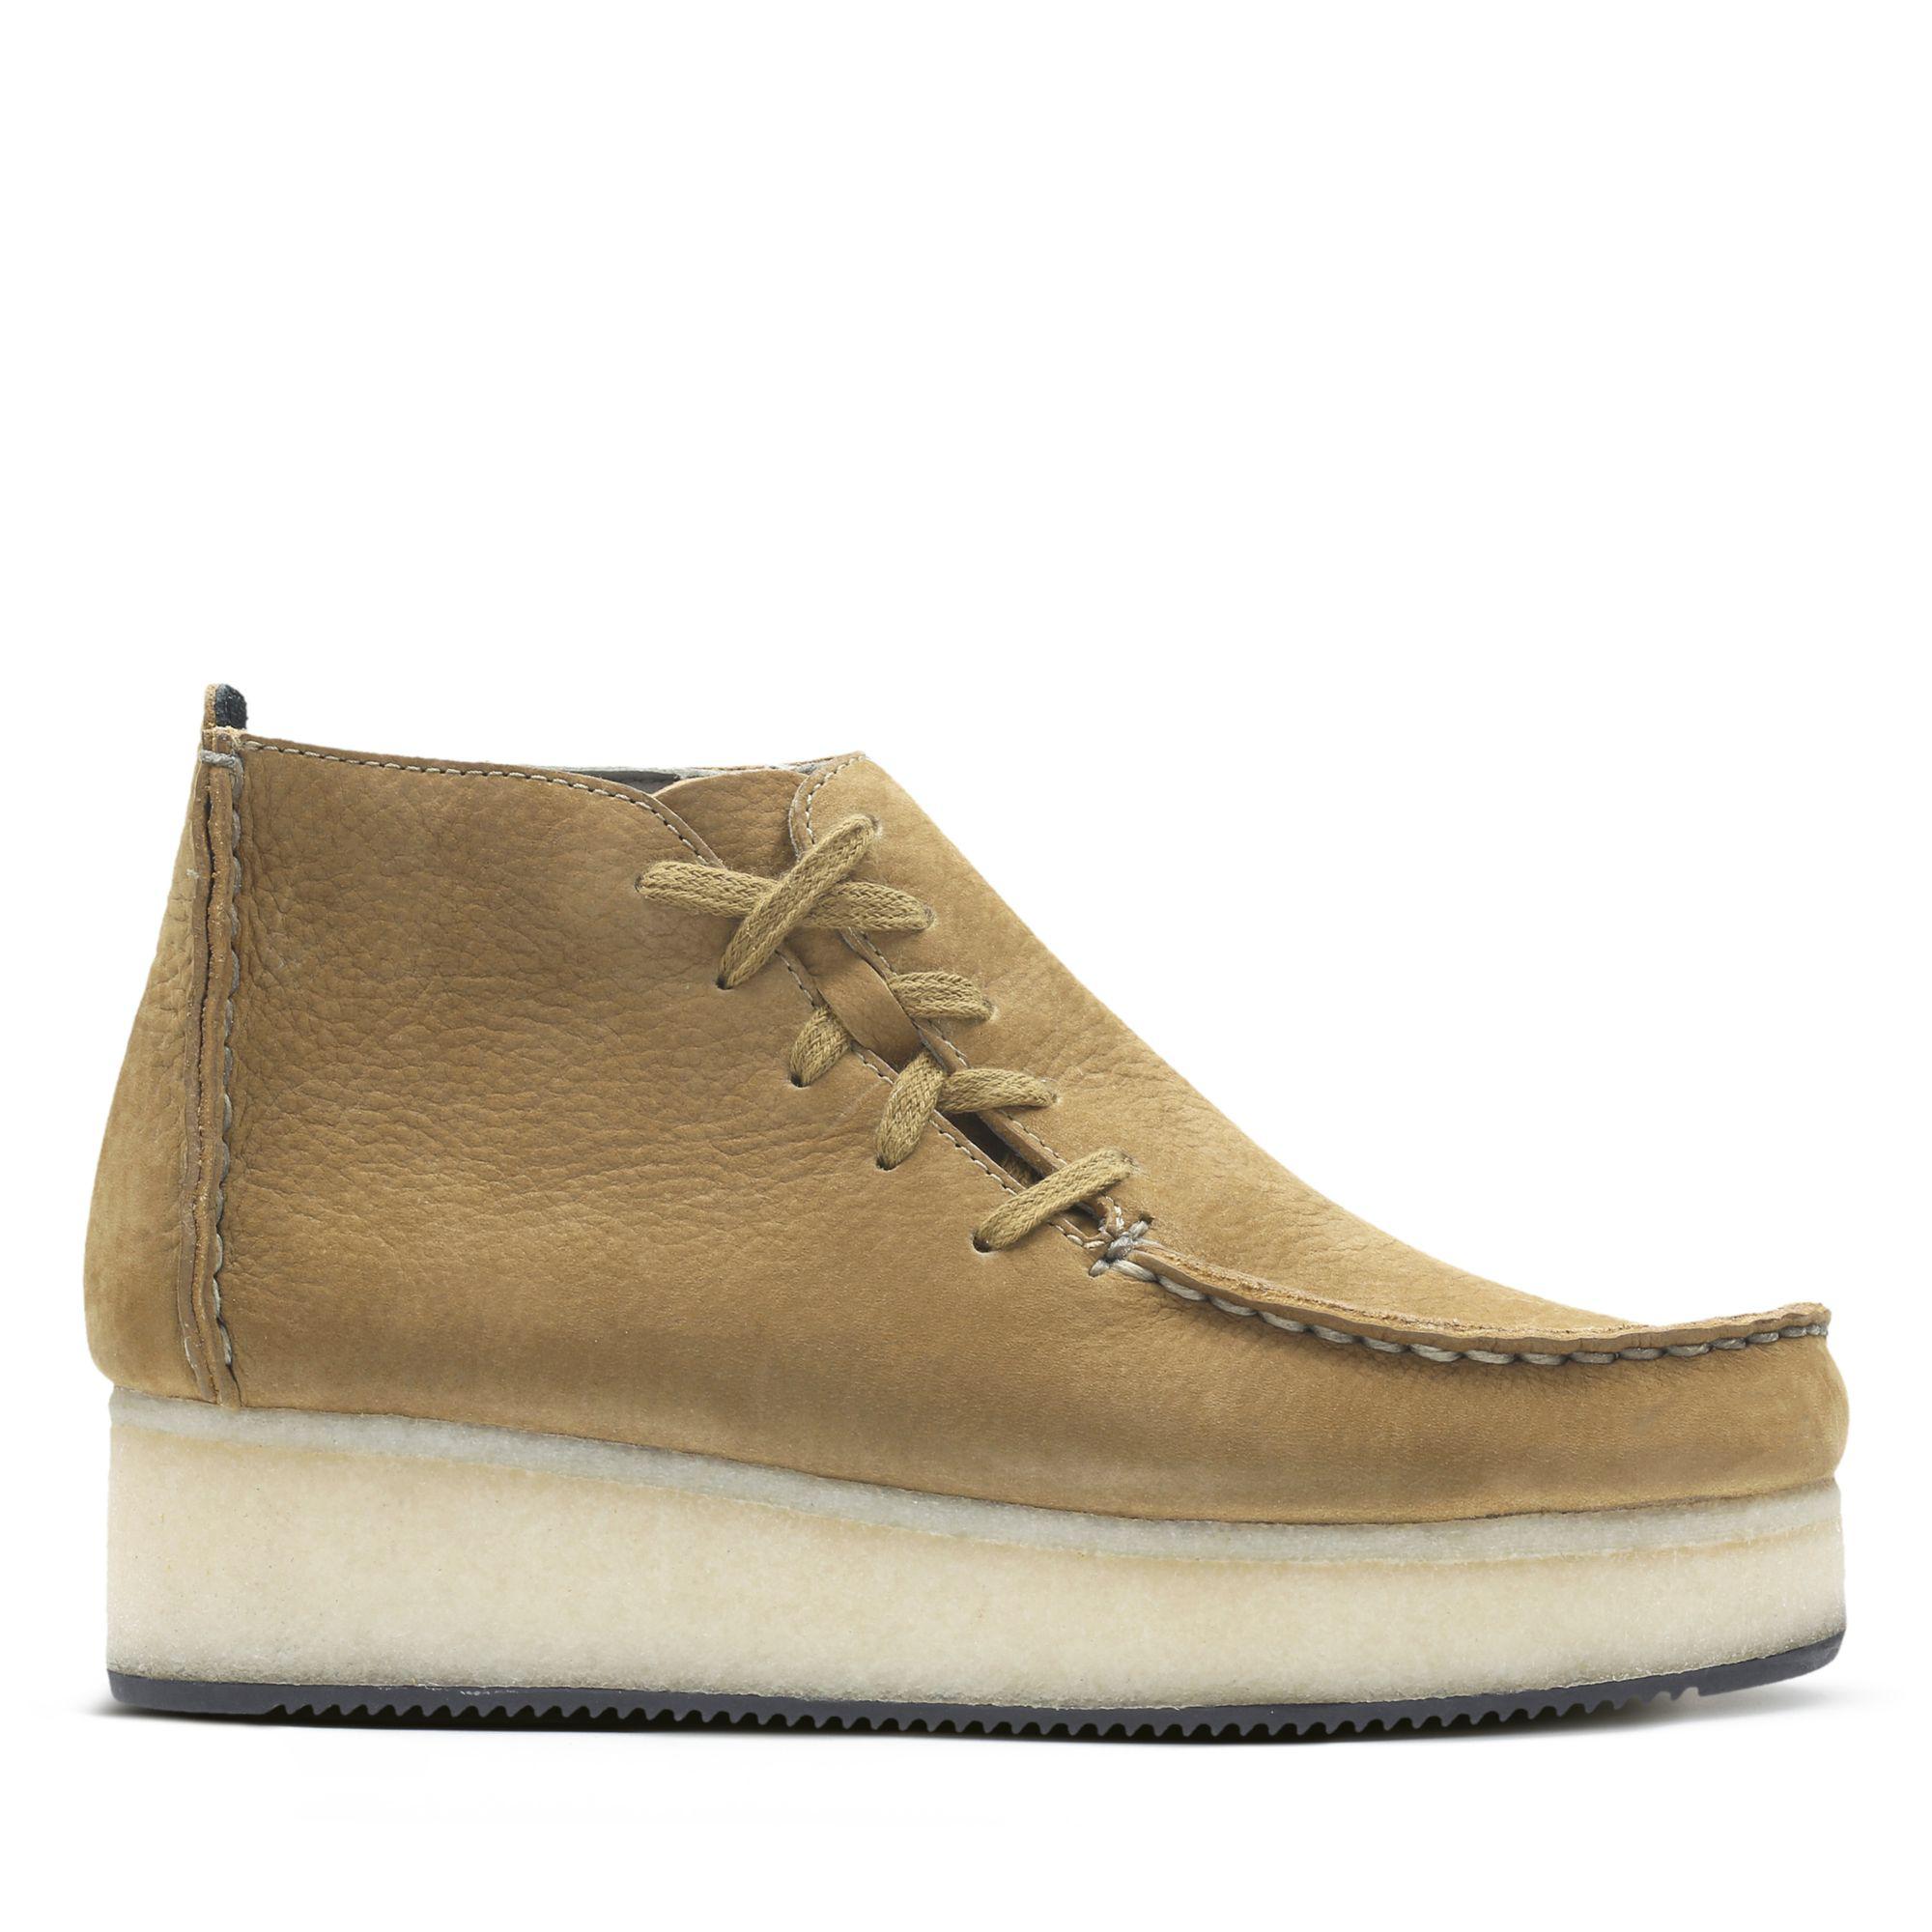 clarks lugger wedge